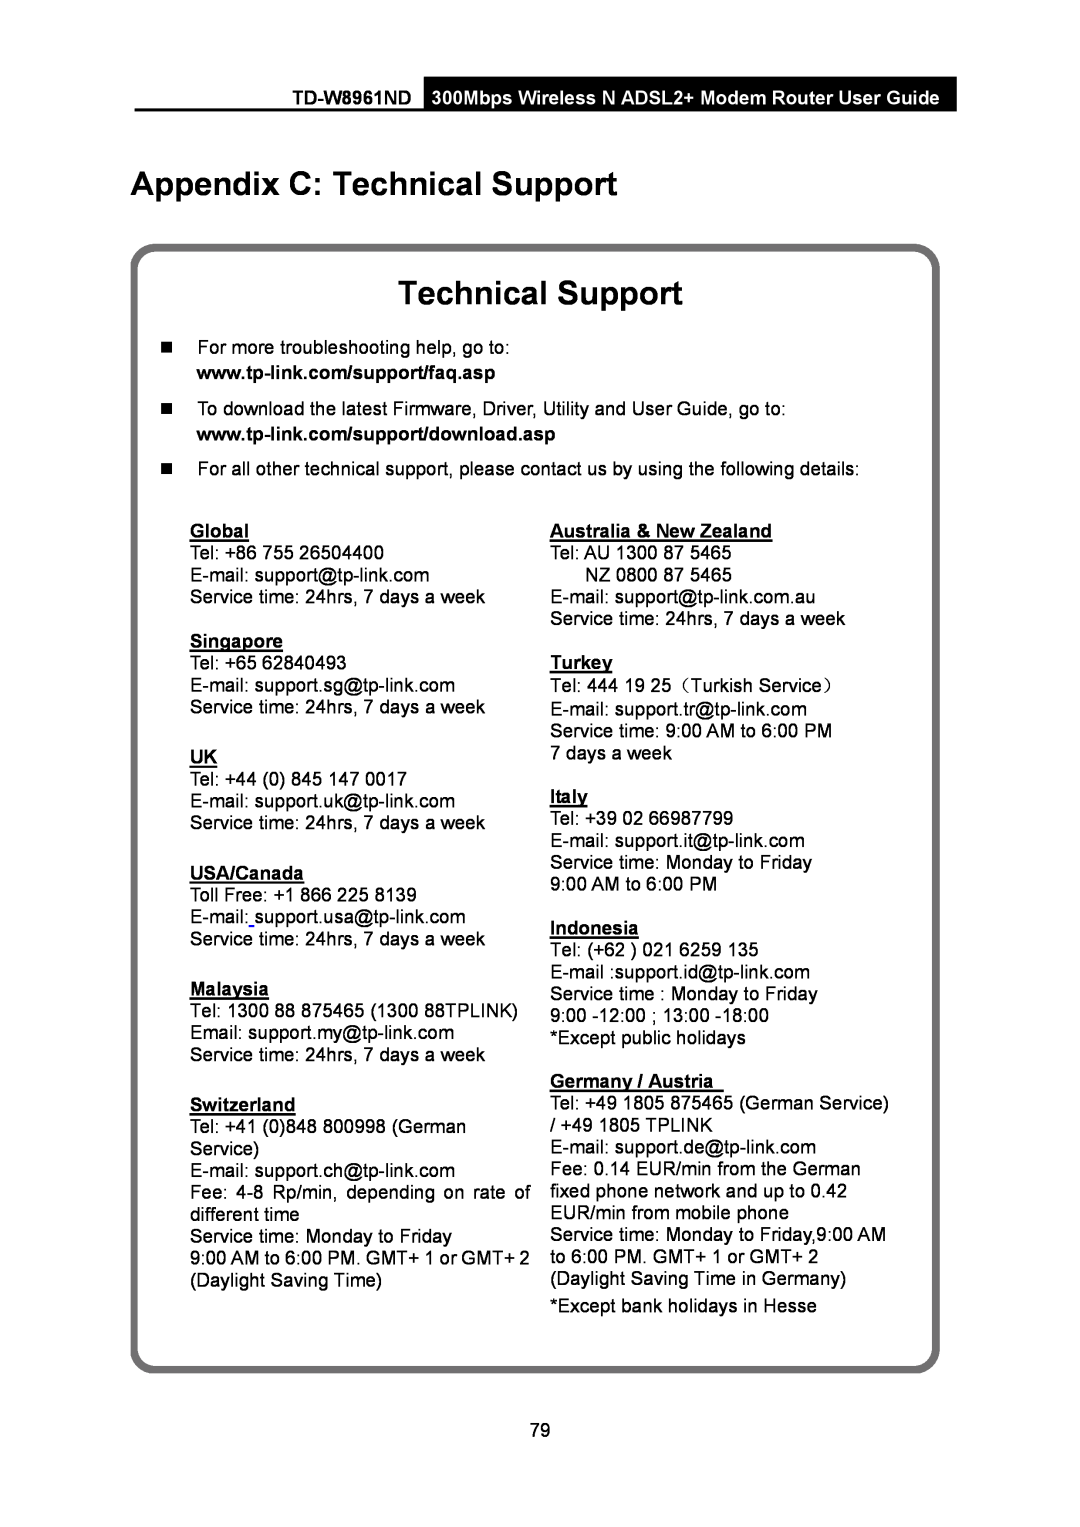 TP-Link td-w8961nd Appendix C Technical Support Technical Support, Global, Singapore, USA/Canada, Malaysia, Switzerland 